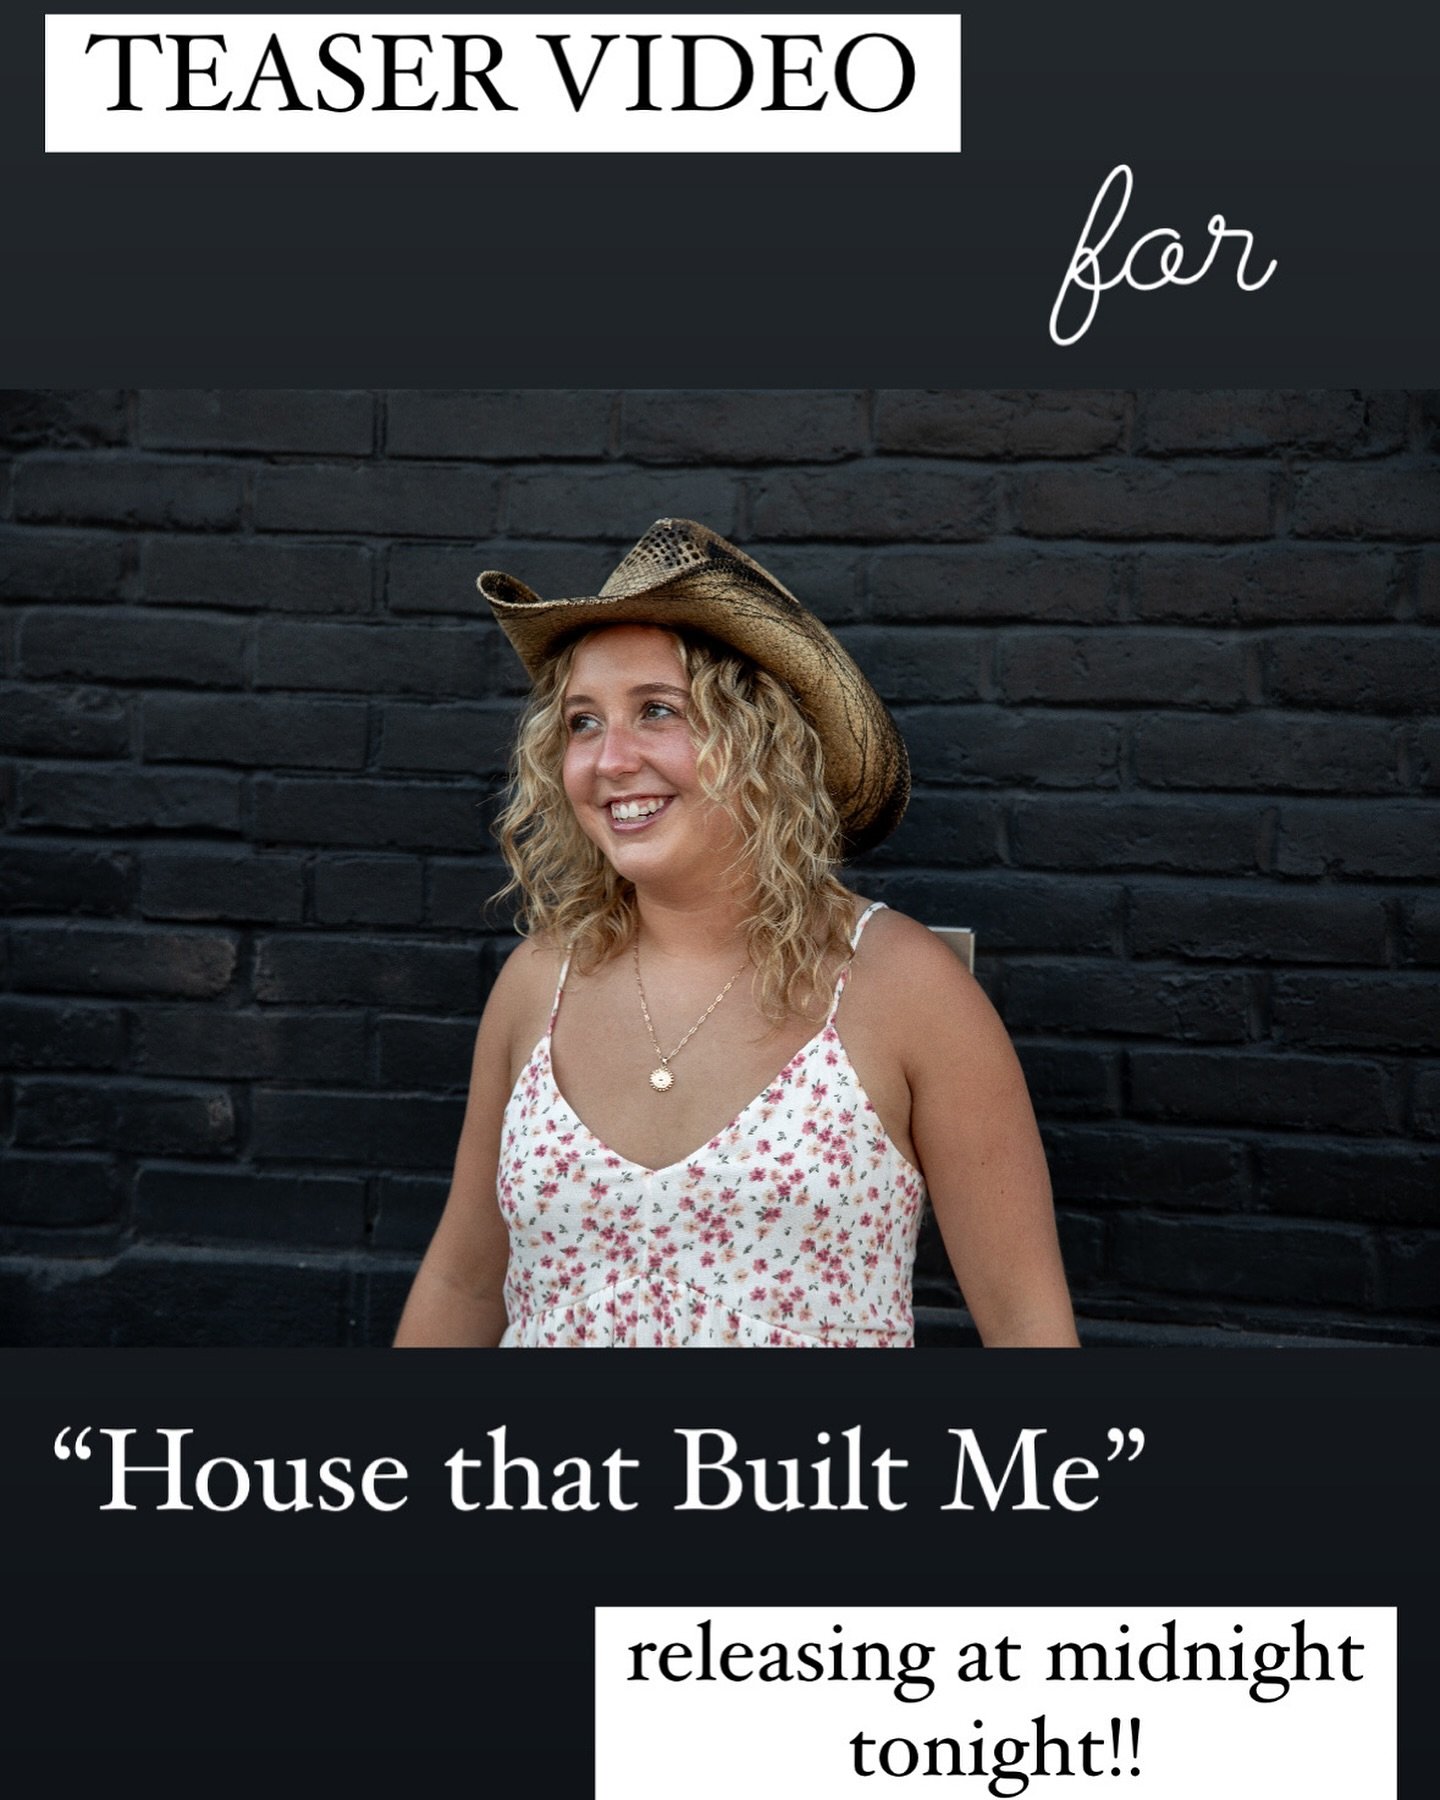 Tonight at midnight the teaser video for &ldquo;House that Built Me&rdquo; is being released!! Can&rsquo;t wait!!🩵🩵 #HKR #recordingartist #cover #housethatbuiltme